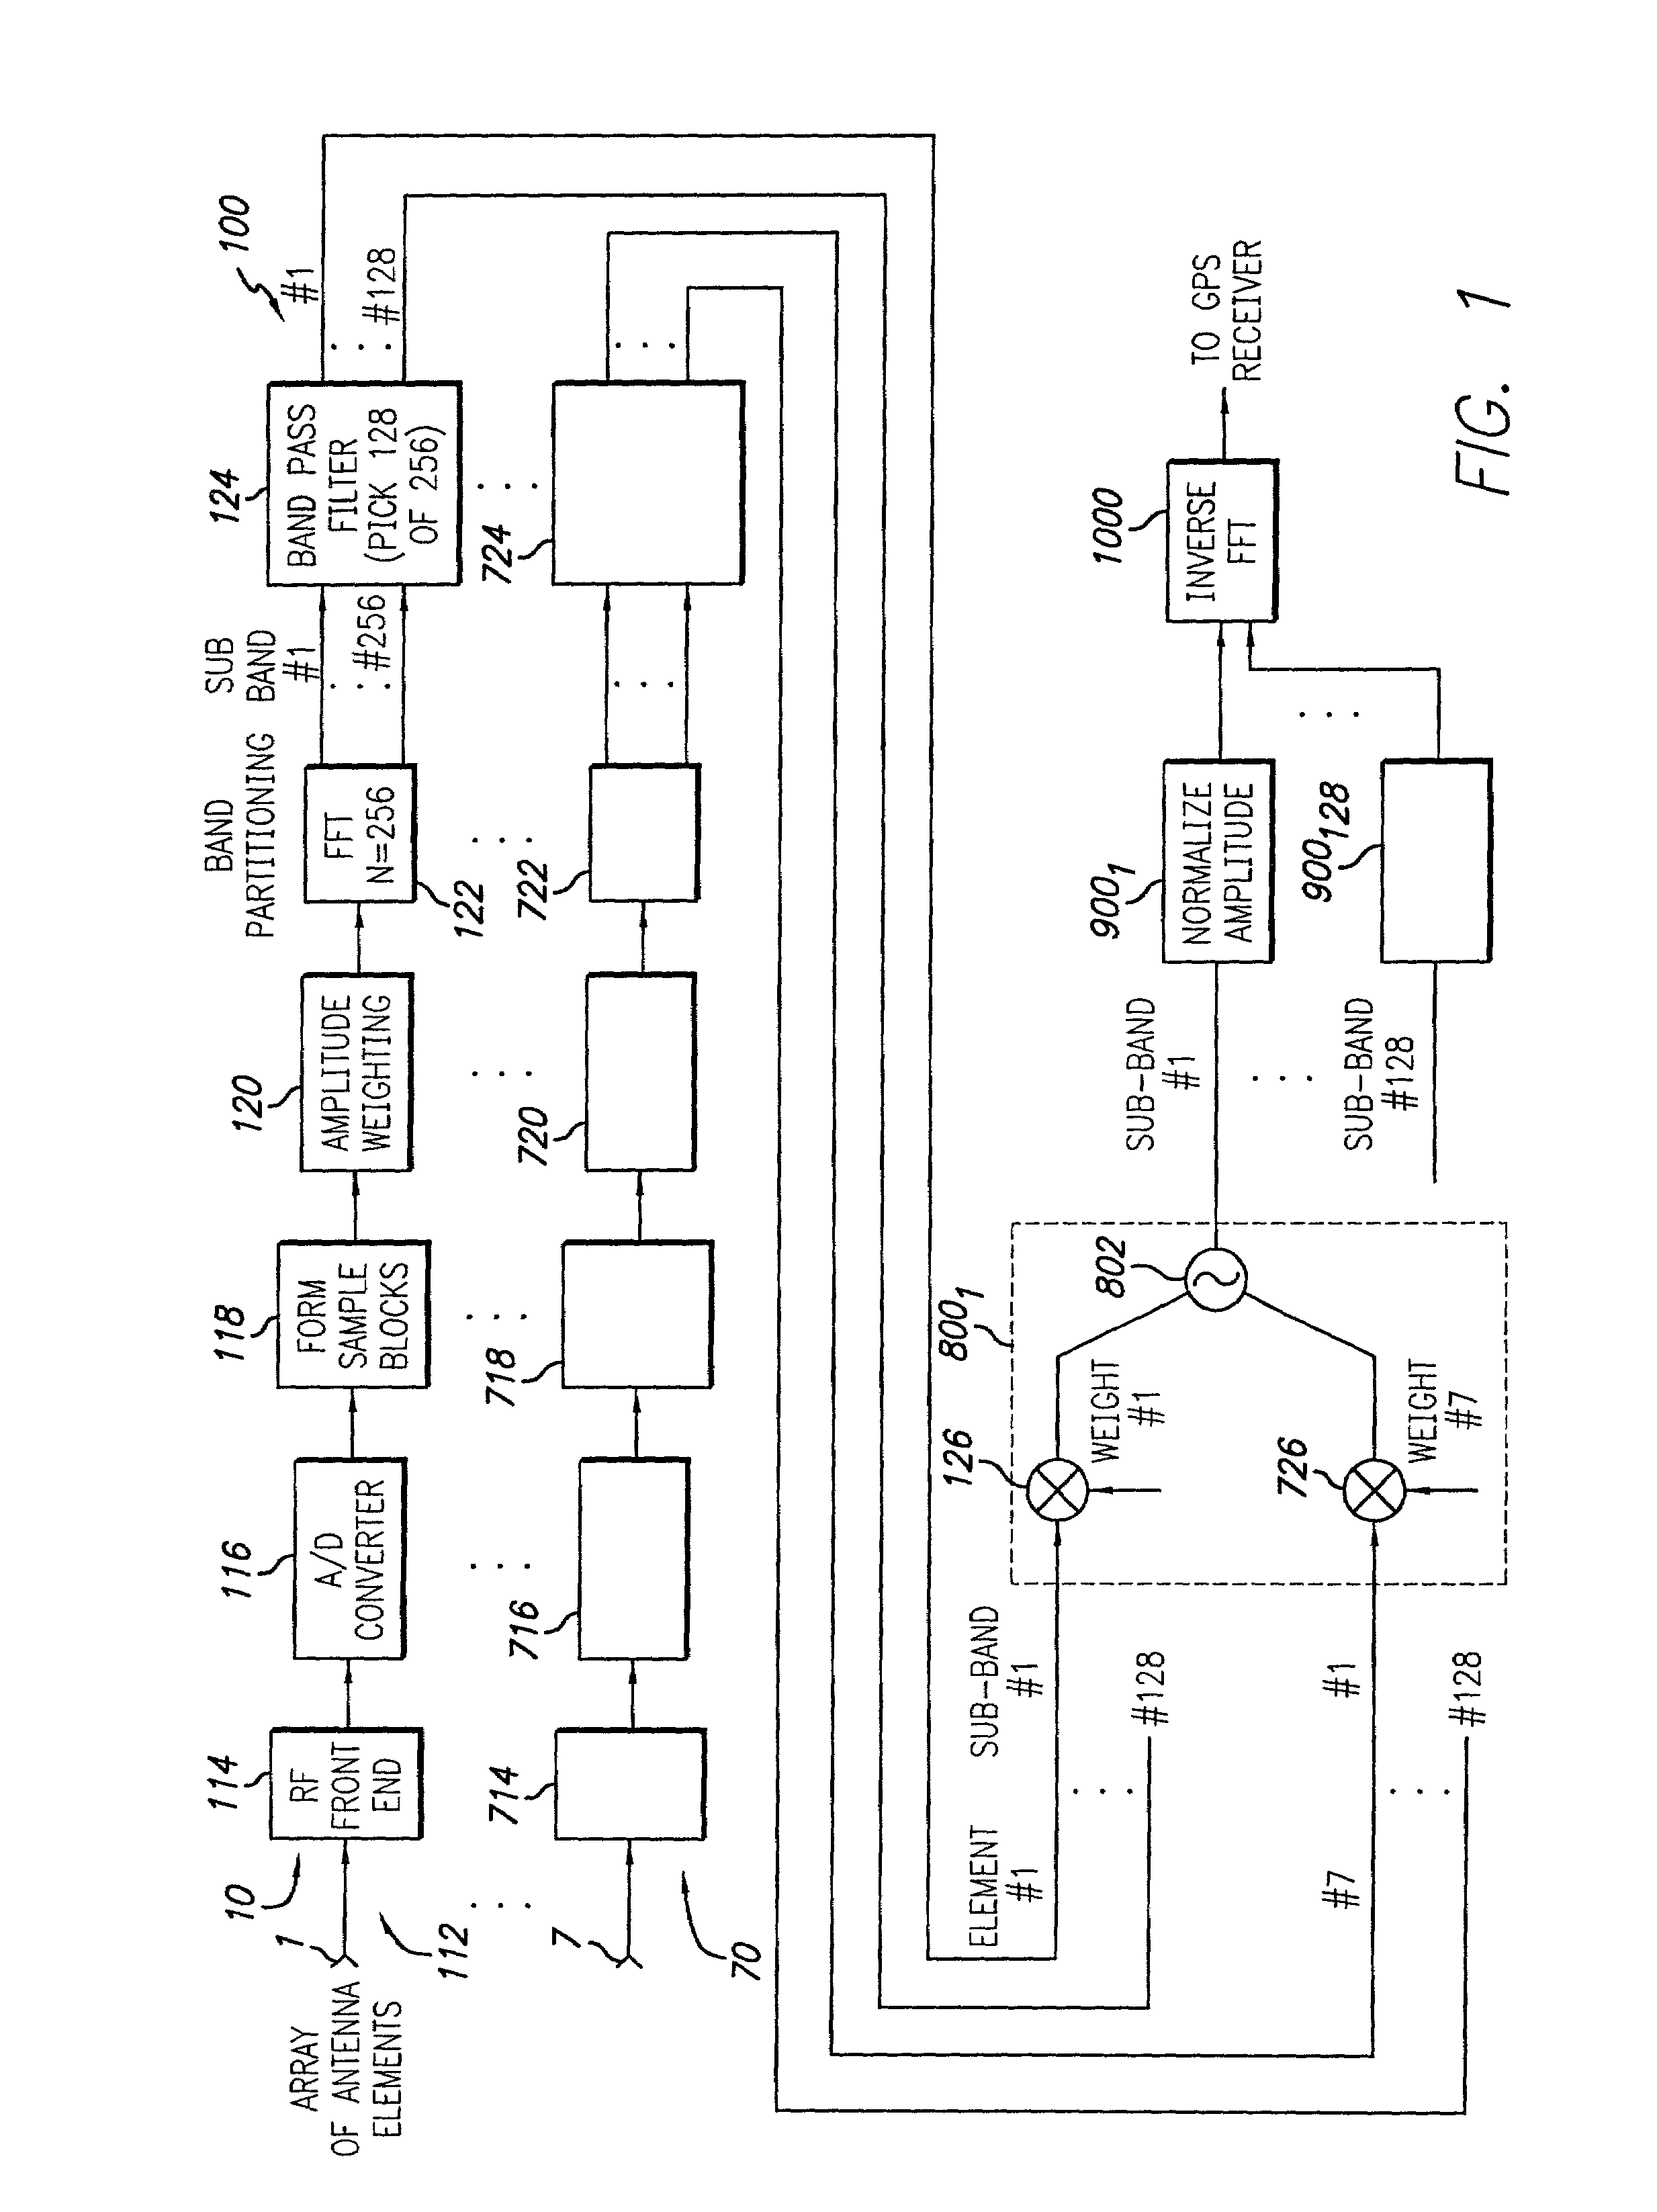 System and method for subband beamforming using adaptive weight normalization